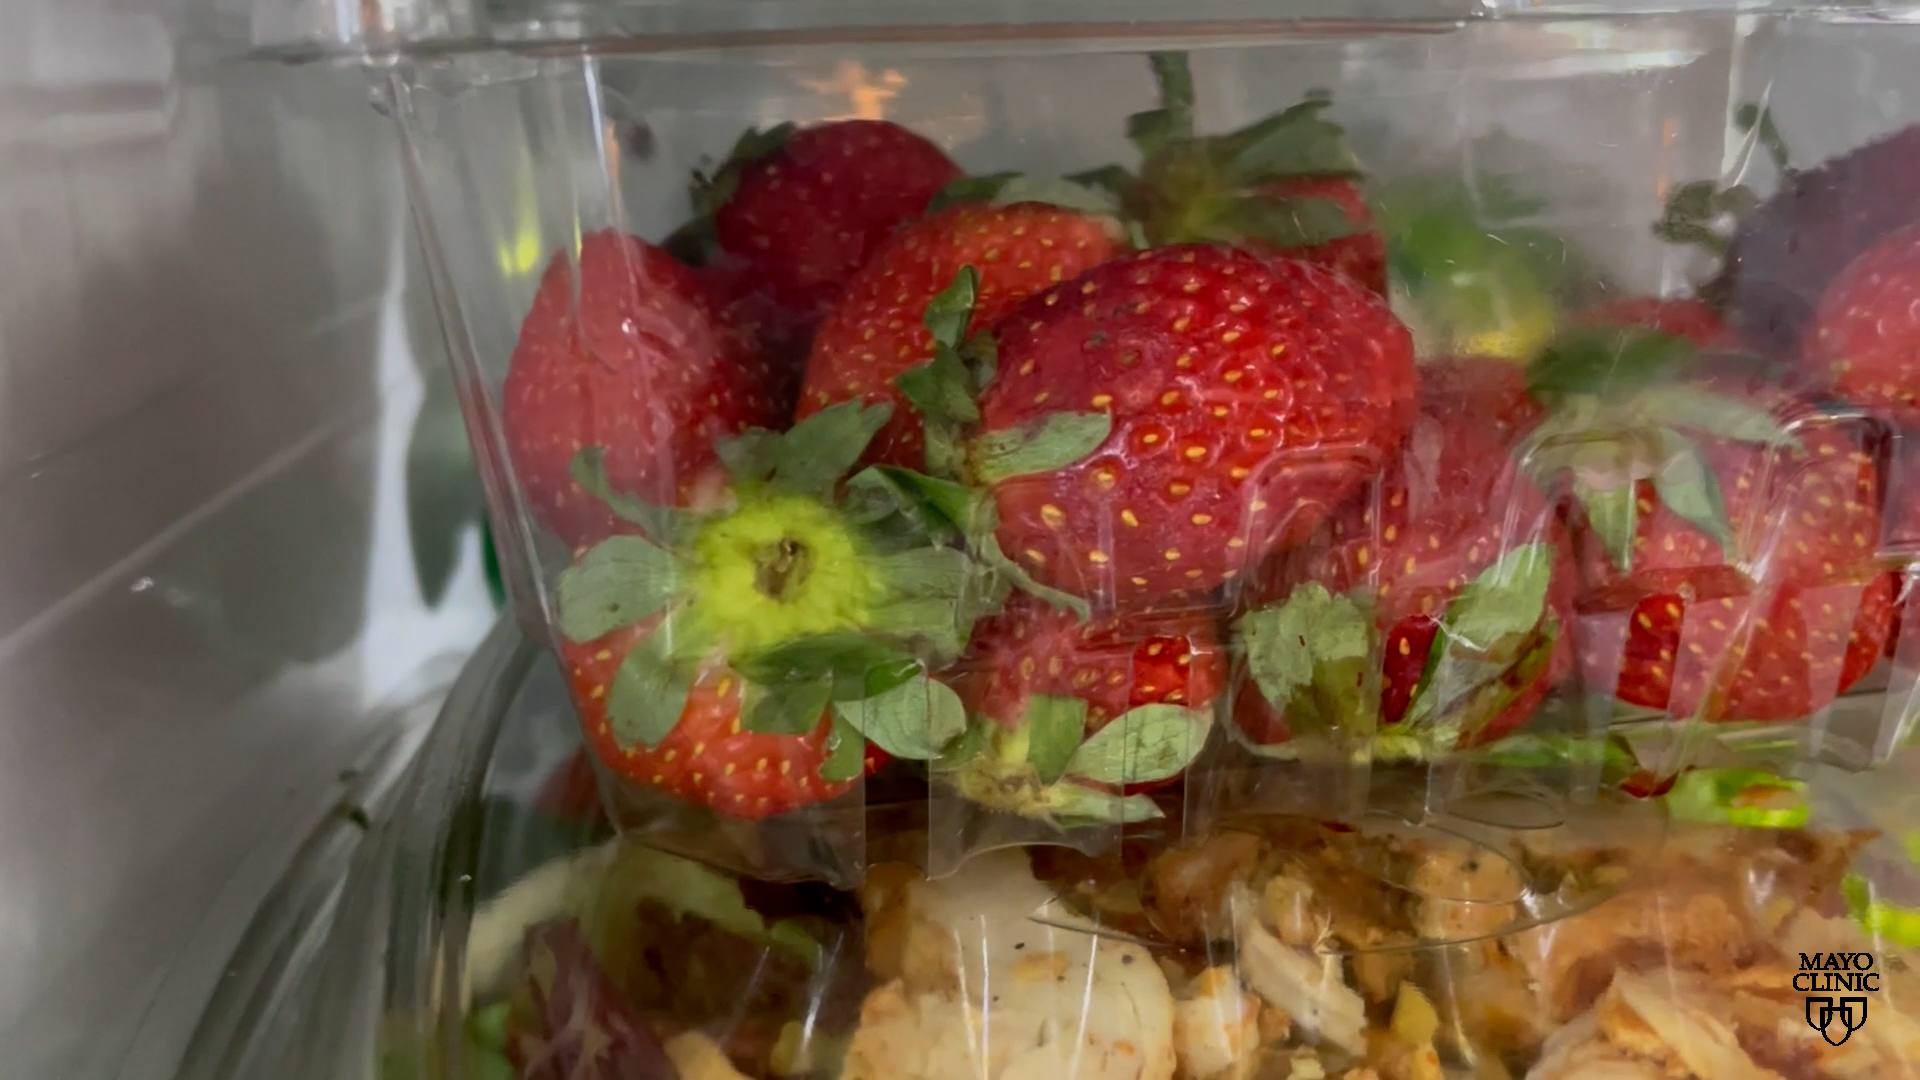 Moldy strawberries in a container in the fridge.